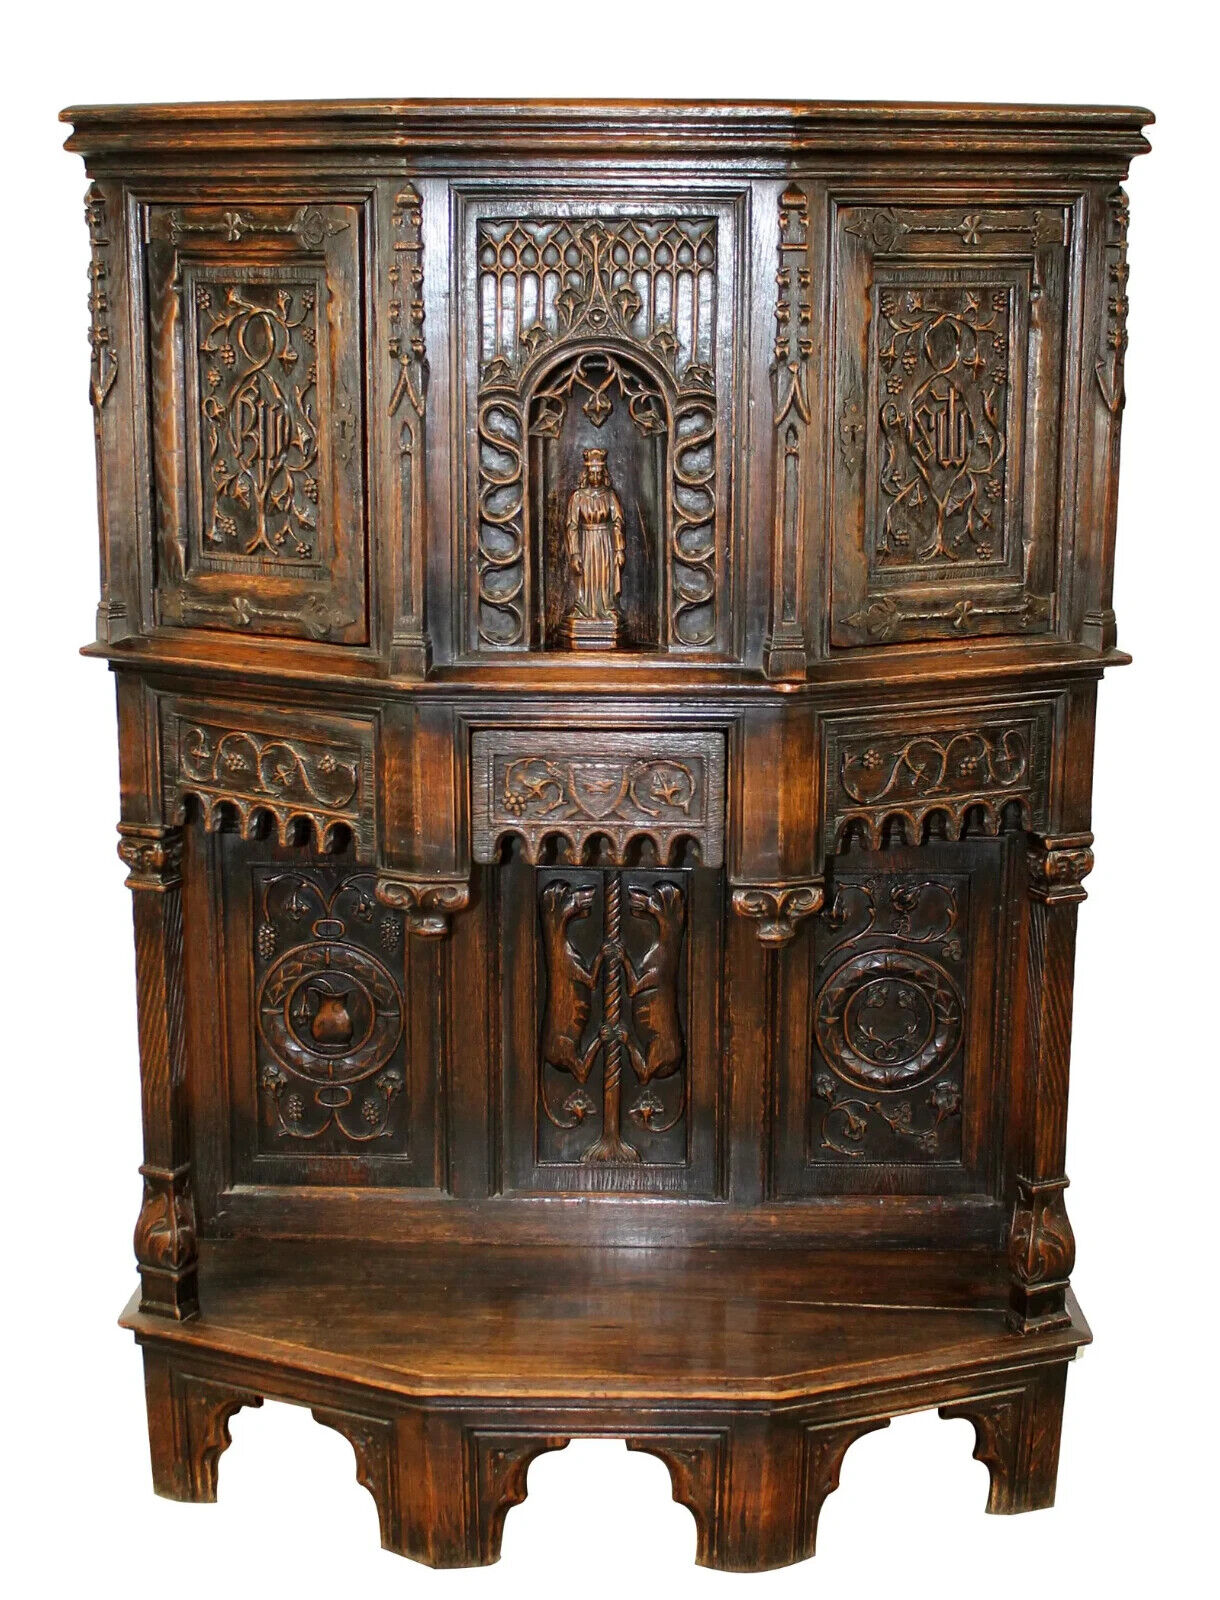 Antique Cabinet, French Gothic Revival, Carved Oak Reliquary w/ Bishop, 1800s